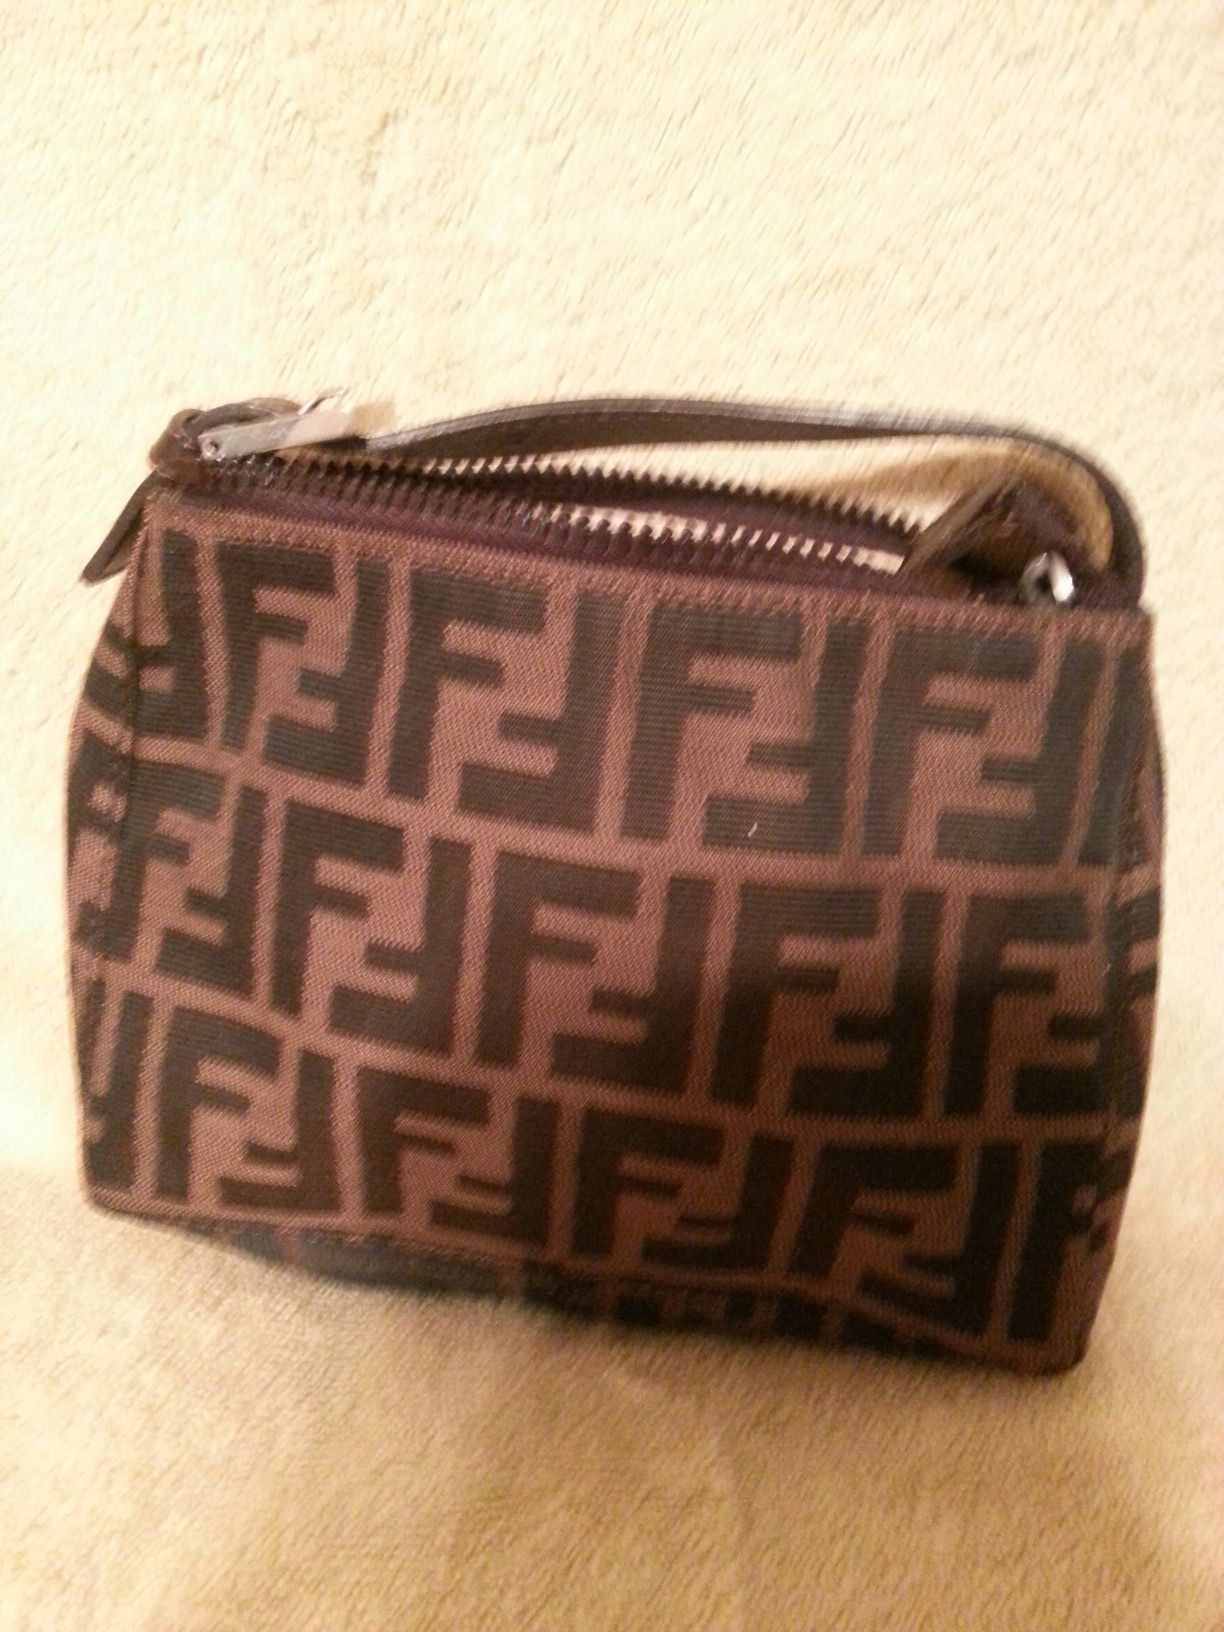 #15. Vintage Authentic small Fendi Bag with handle